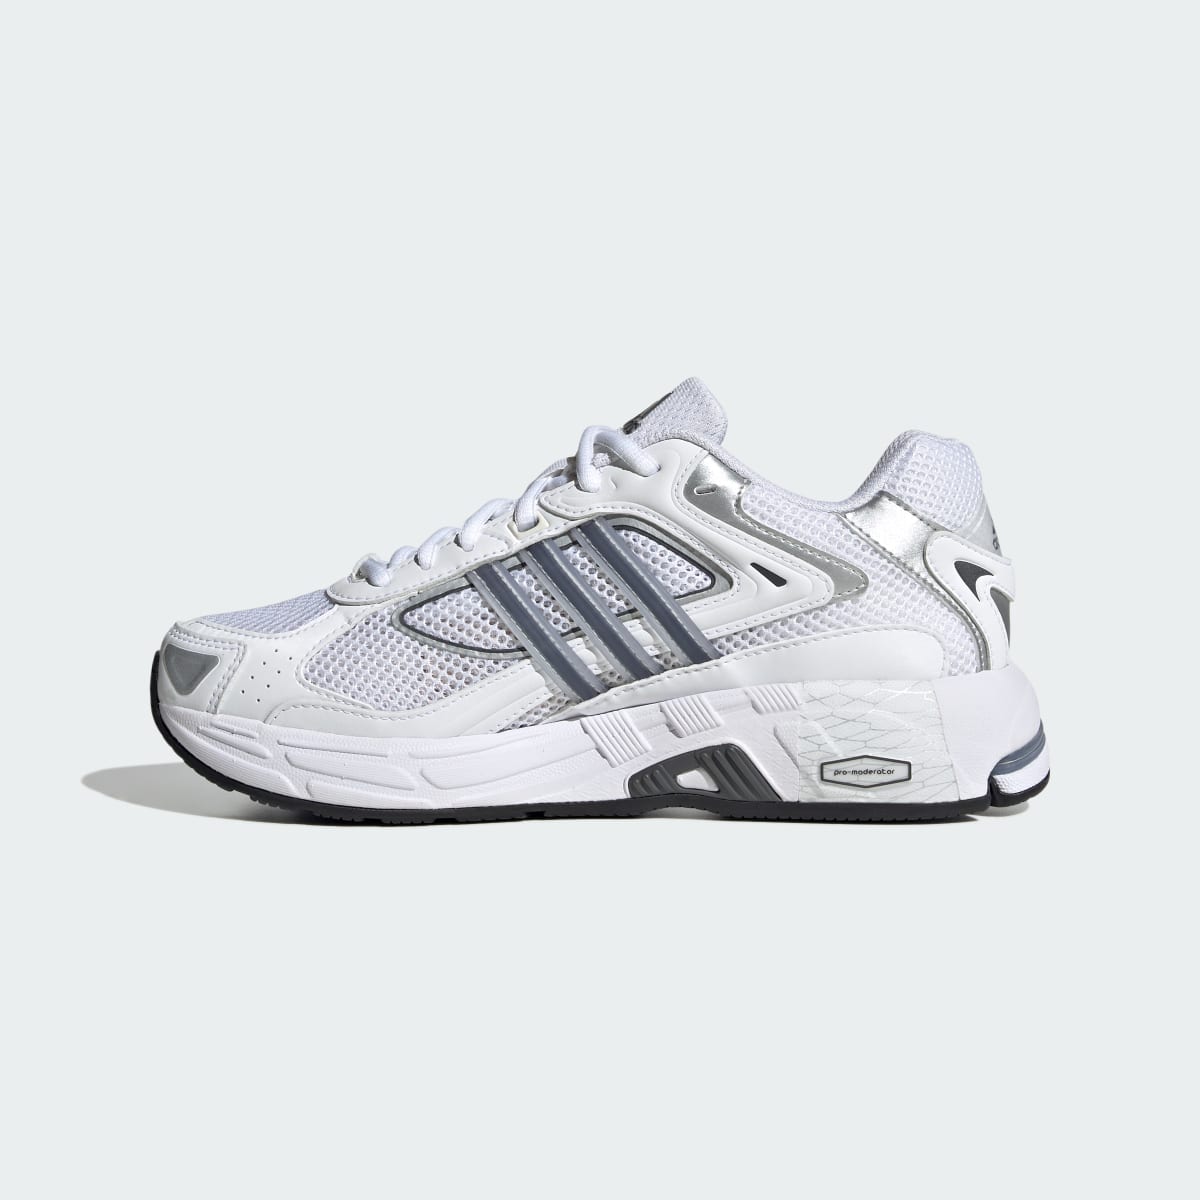 Adidas Response CL Shoes. 10